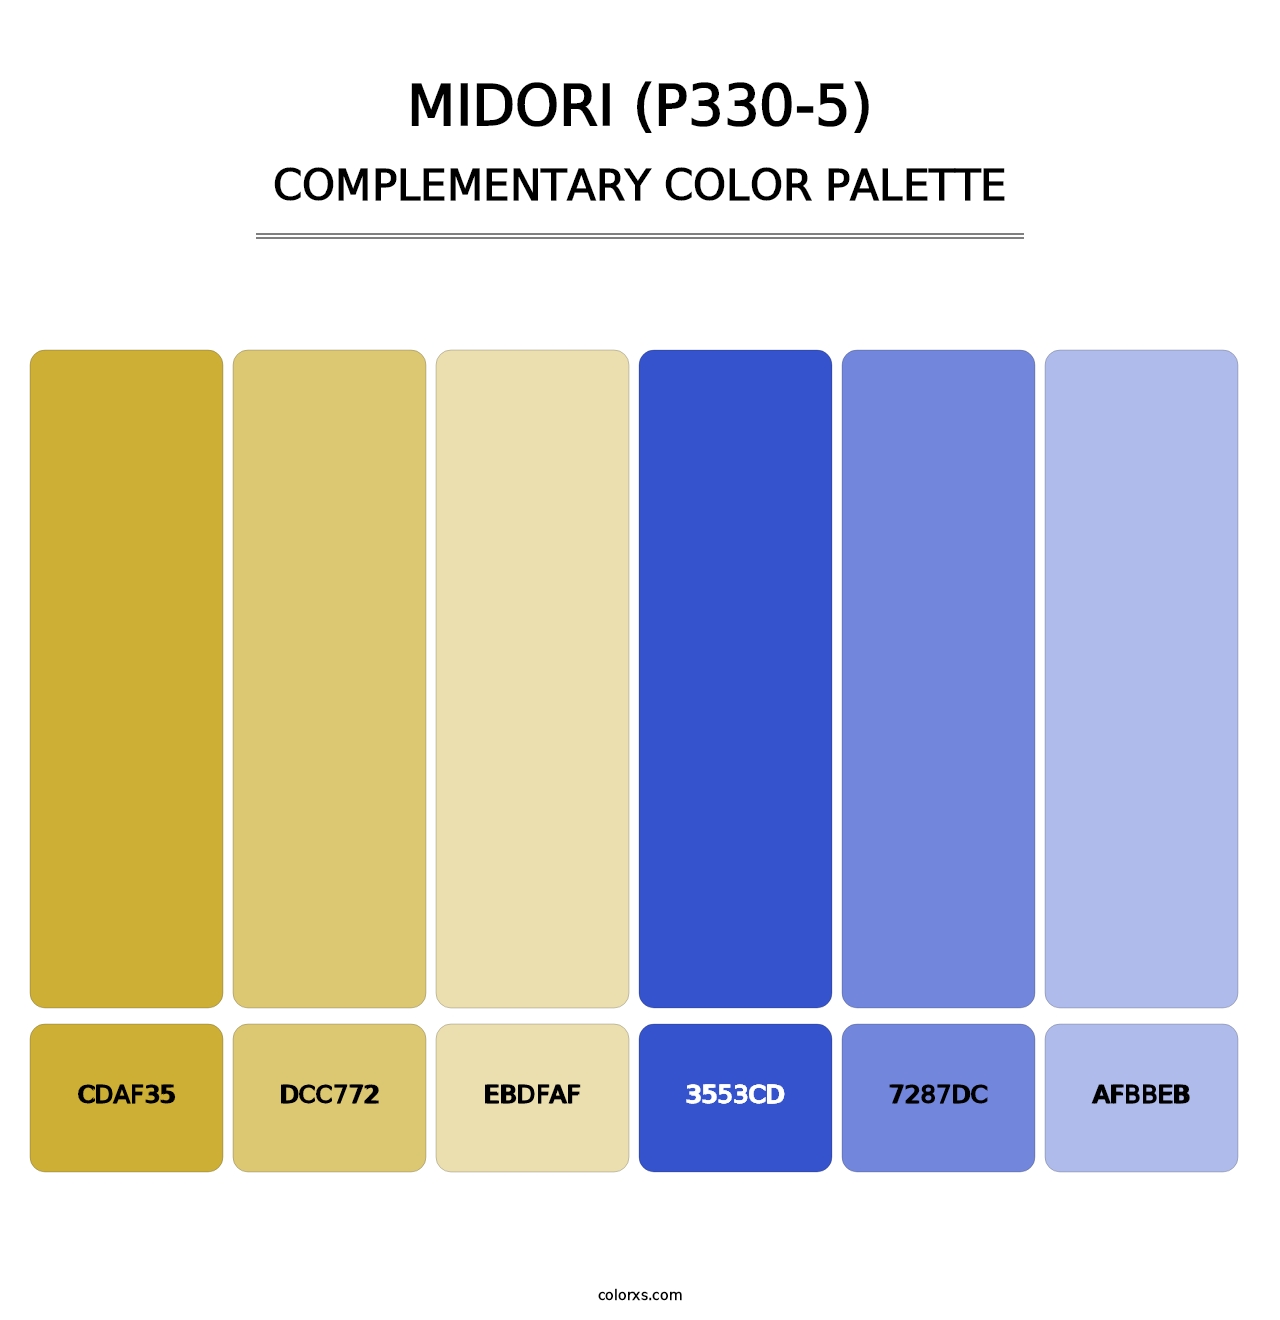 Midori (P330-5) - Complementary Color Palette